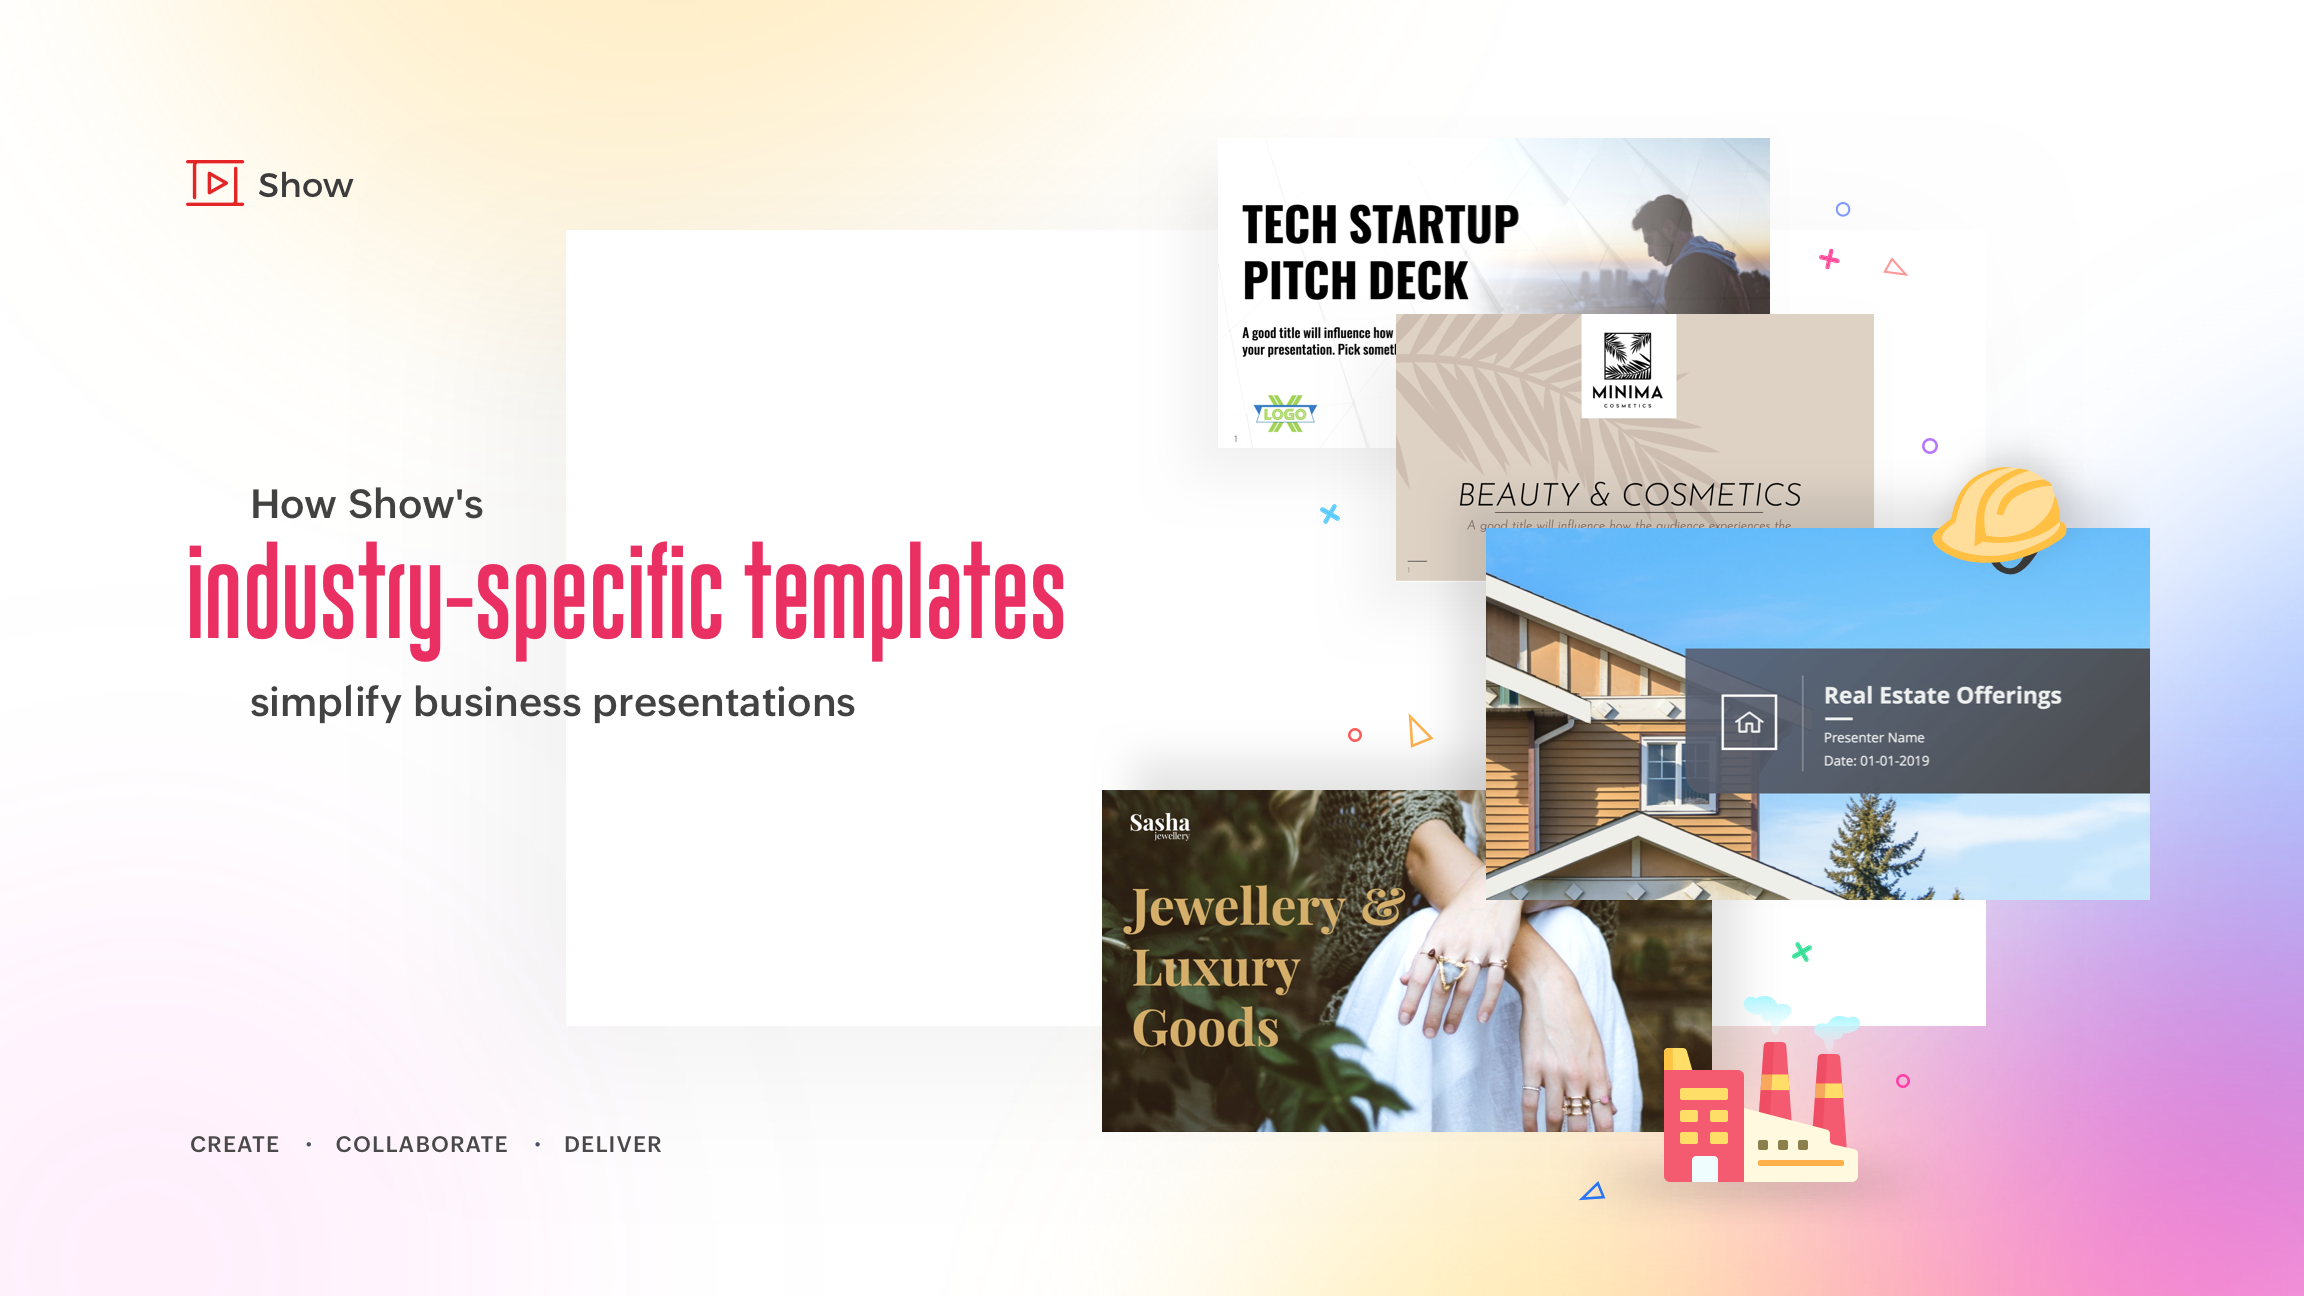 How Show's industry-specific templates simplify business presentations